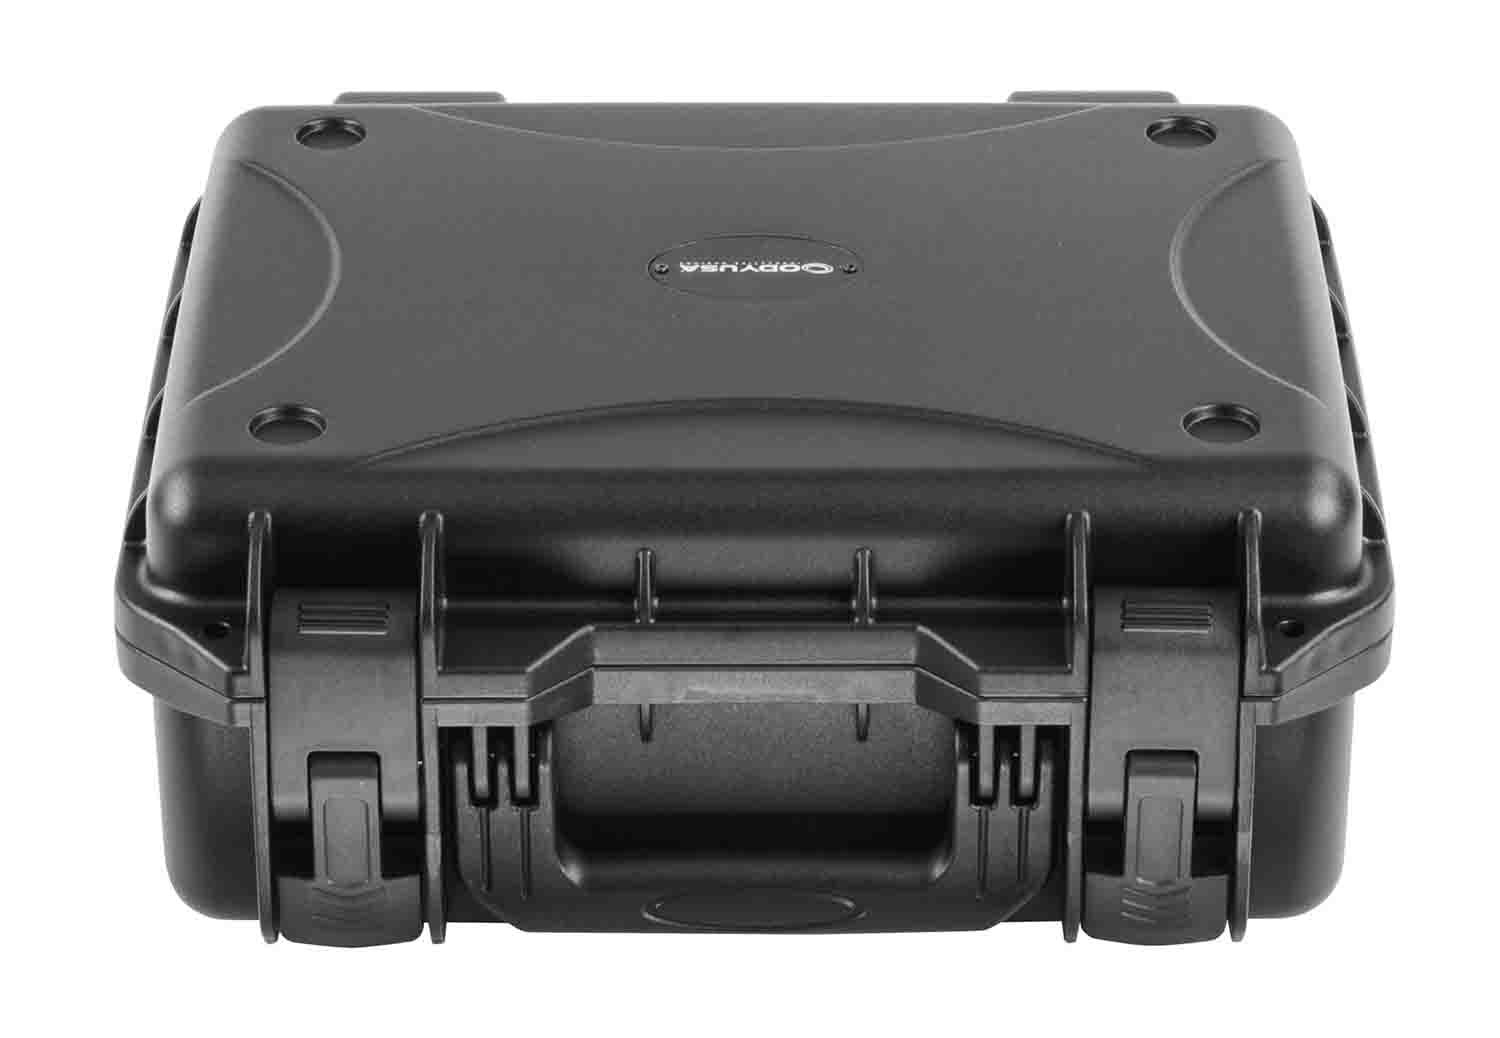 Odyssey VU131105NF Vulcan Injection-Molded Utility Case - 13 x 9.5 x 3.75" Interior - Hollywood DJ